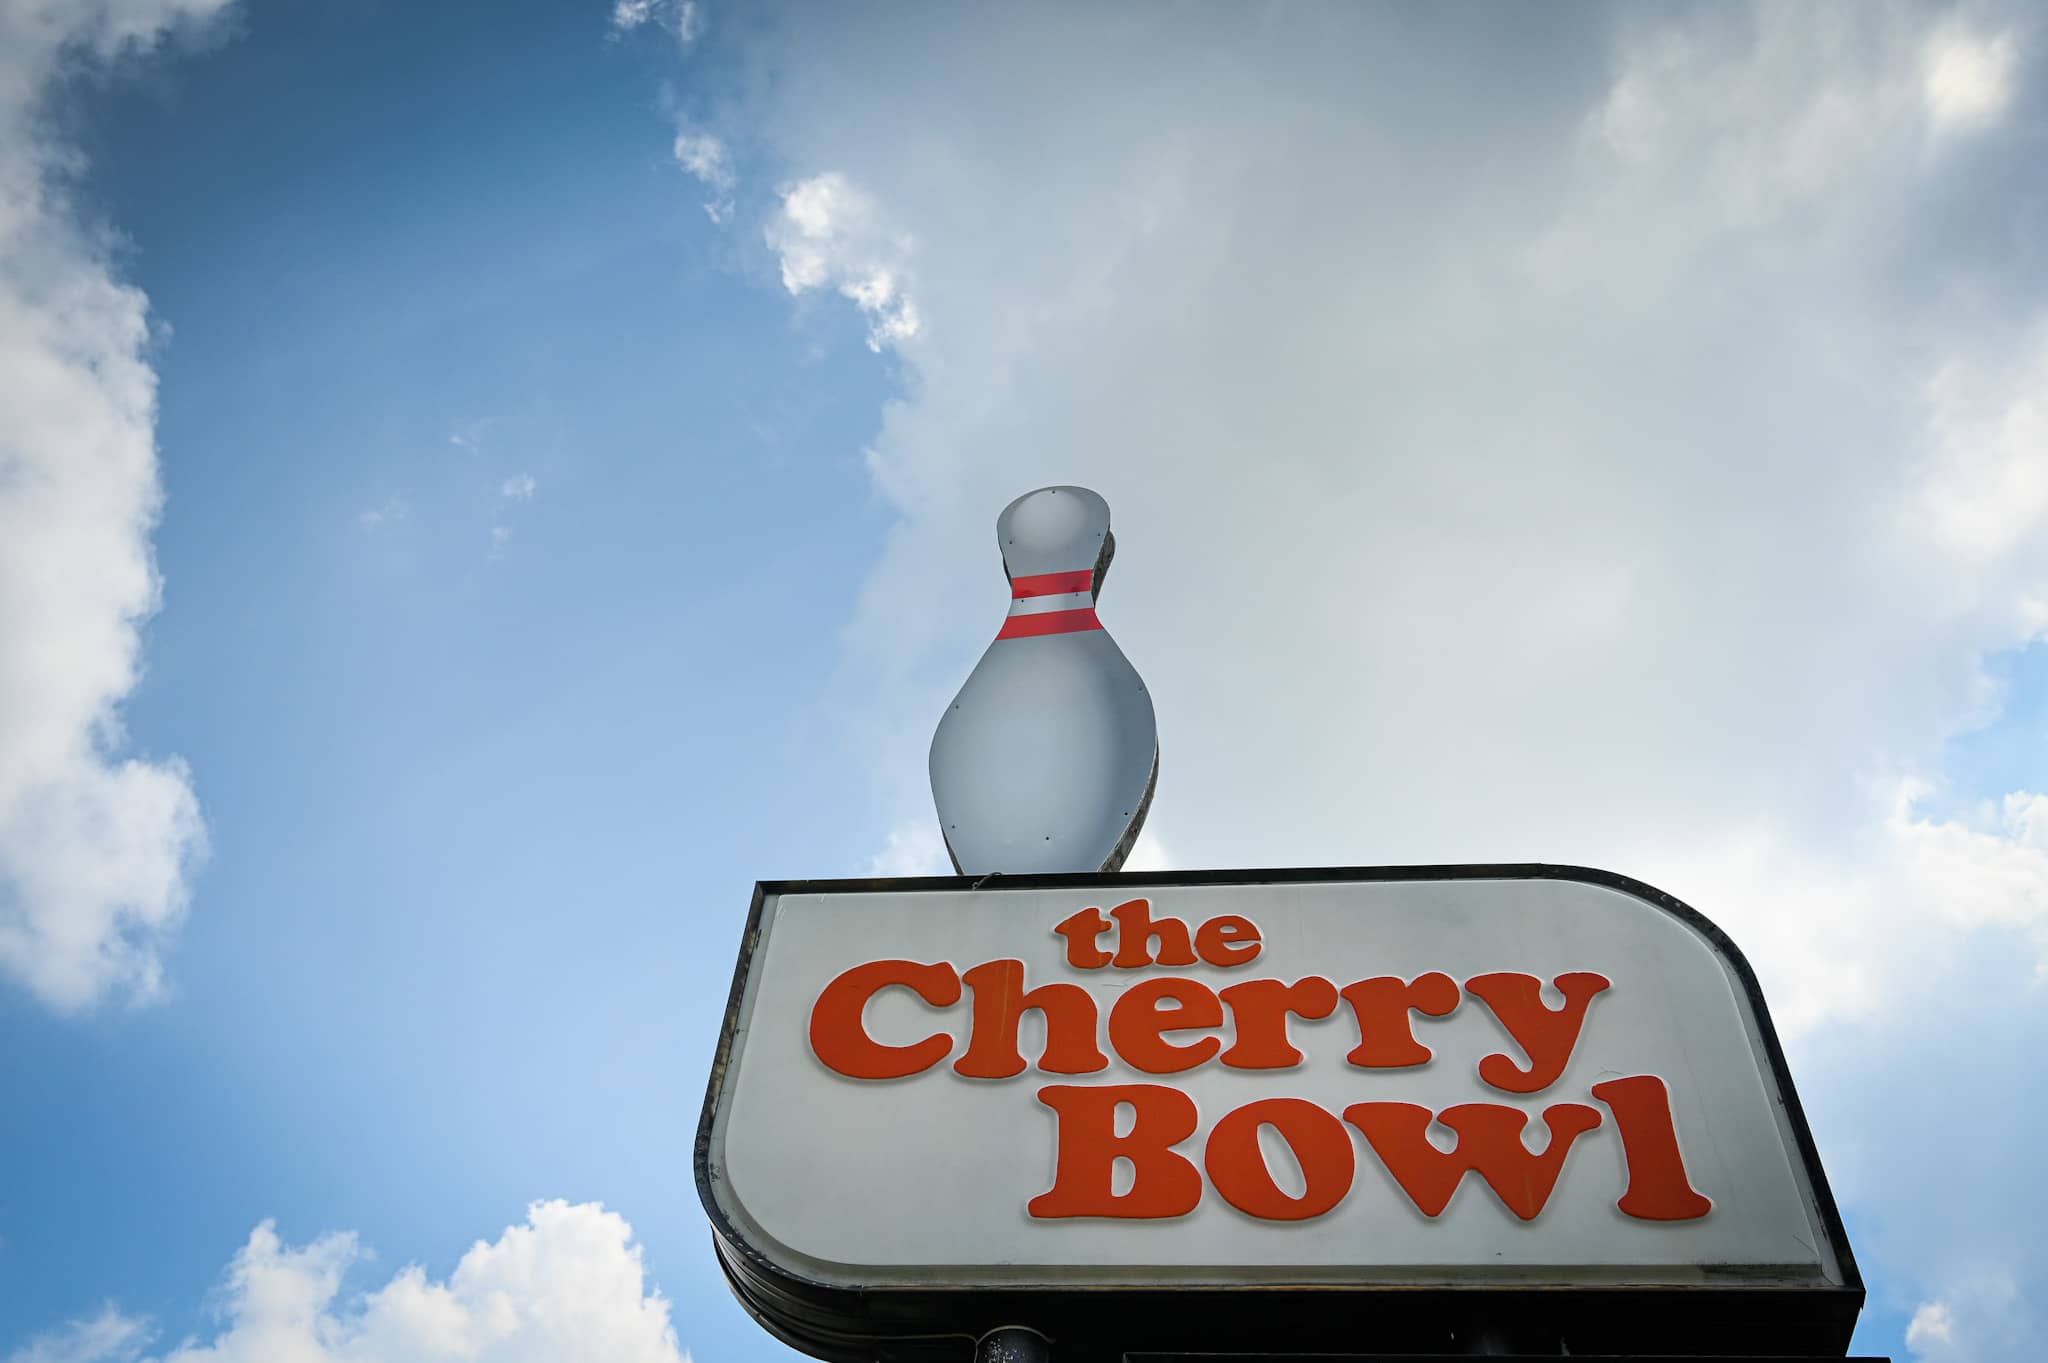 PWBA Tour kicks off at Cherry Bowl, bringing hundreds of visitors to Rockford area Rock River Current